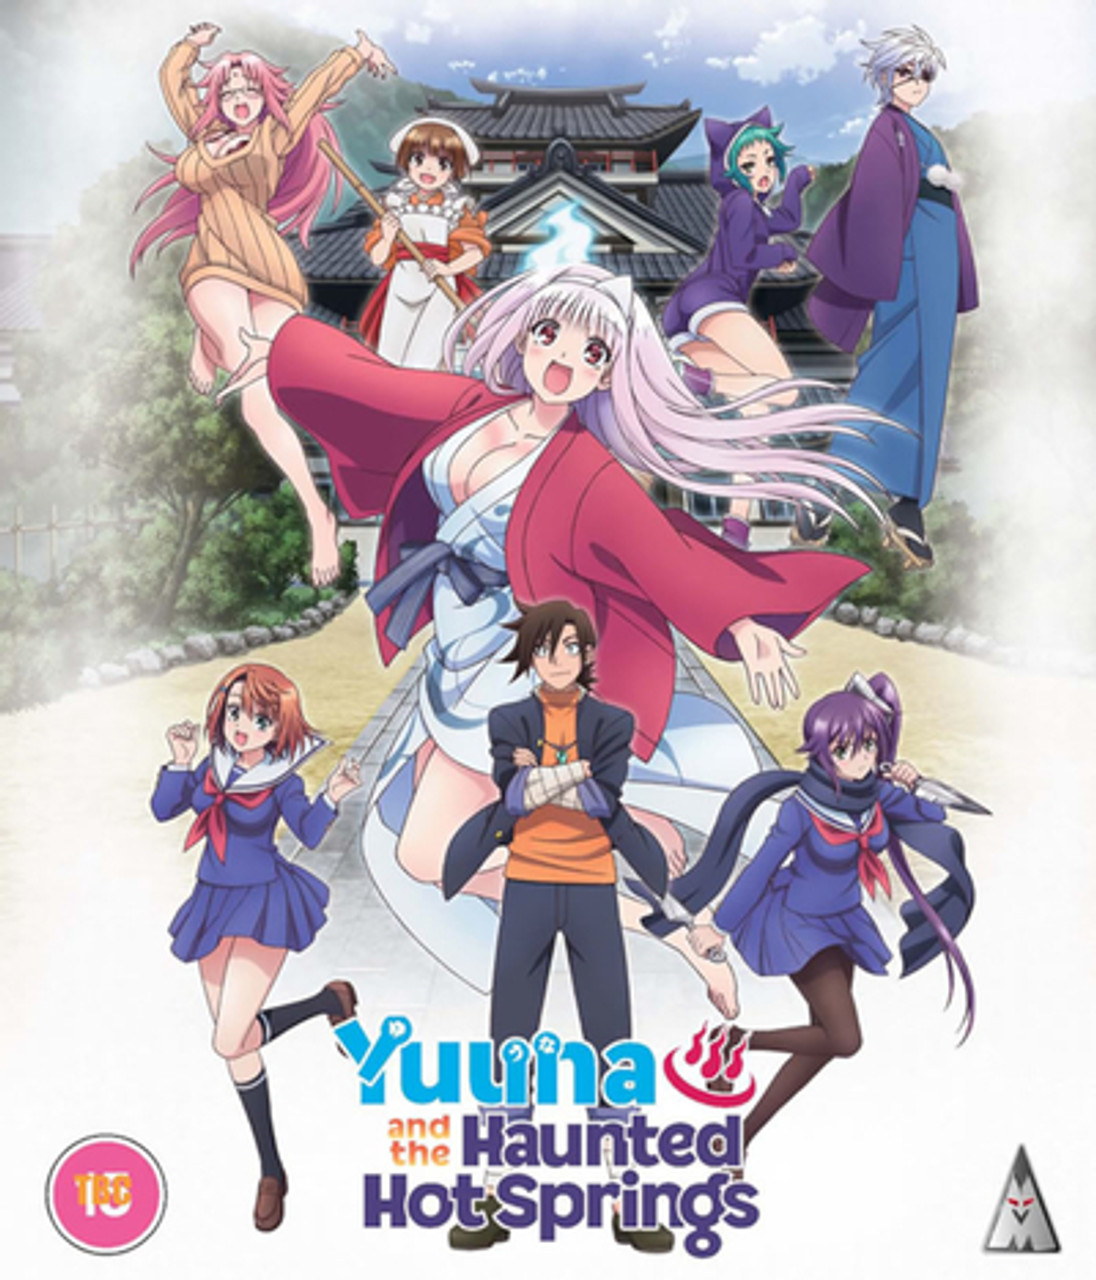 Yuuna and The Haunted Hot Springs - Blu-ray Region B for sale online